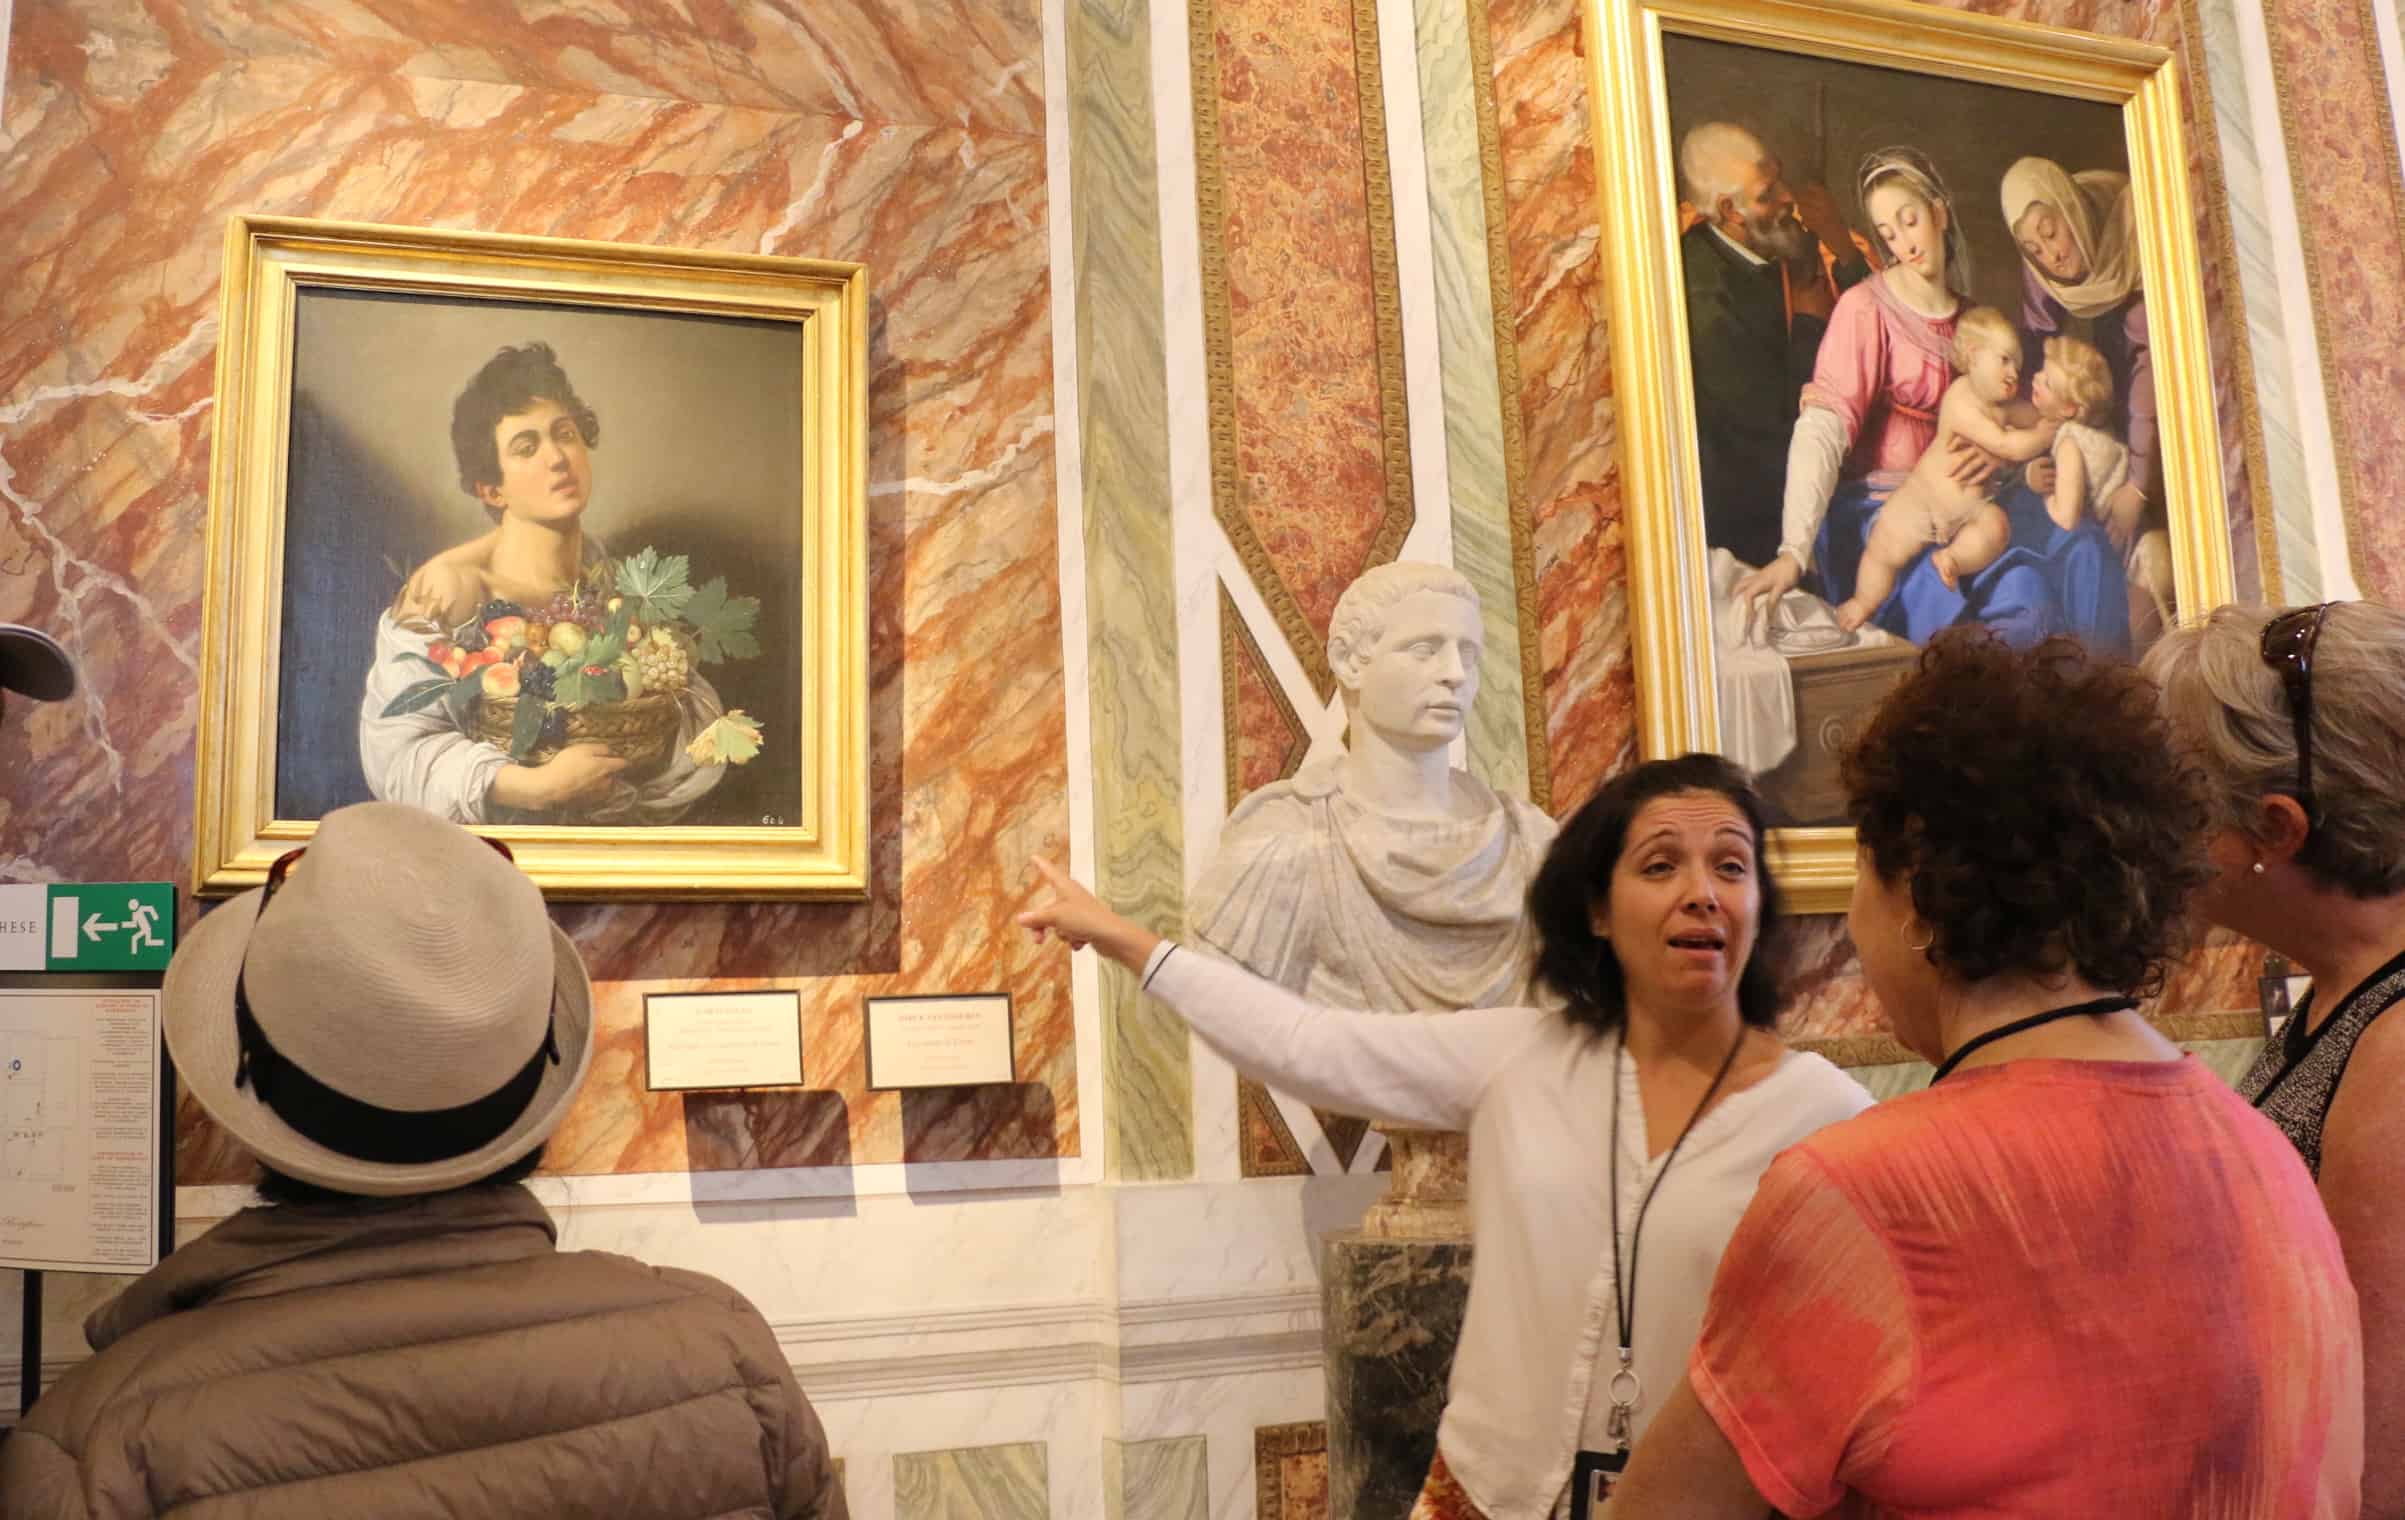 Tour guide showing the Boy with Basket of Fruit painting by Caravaggio to a group of visitors in the Borghese Gallery in Rome.